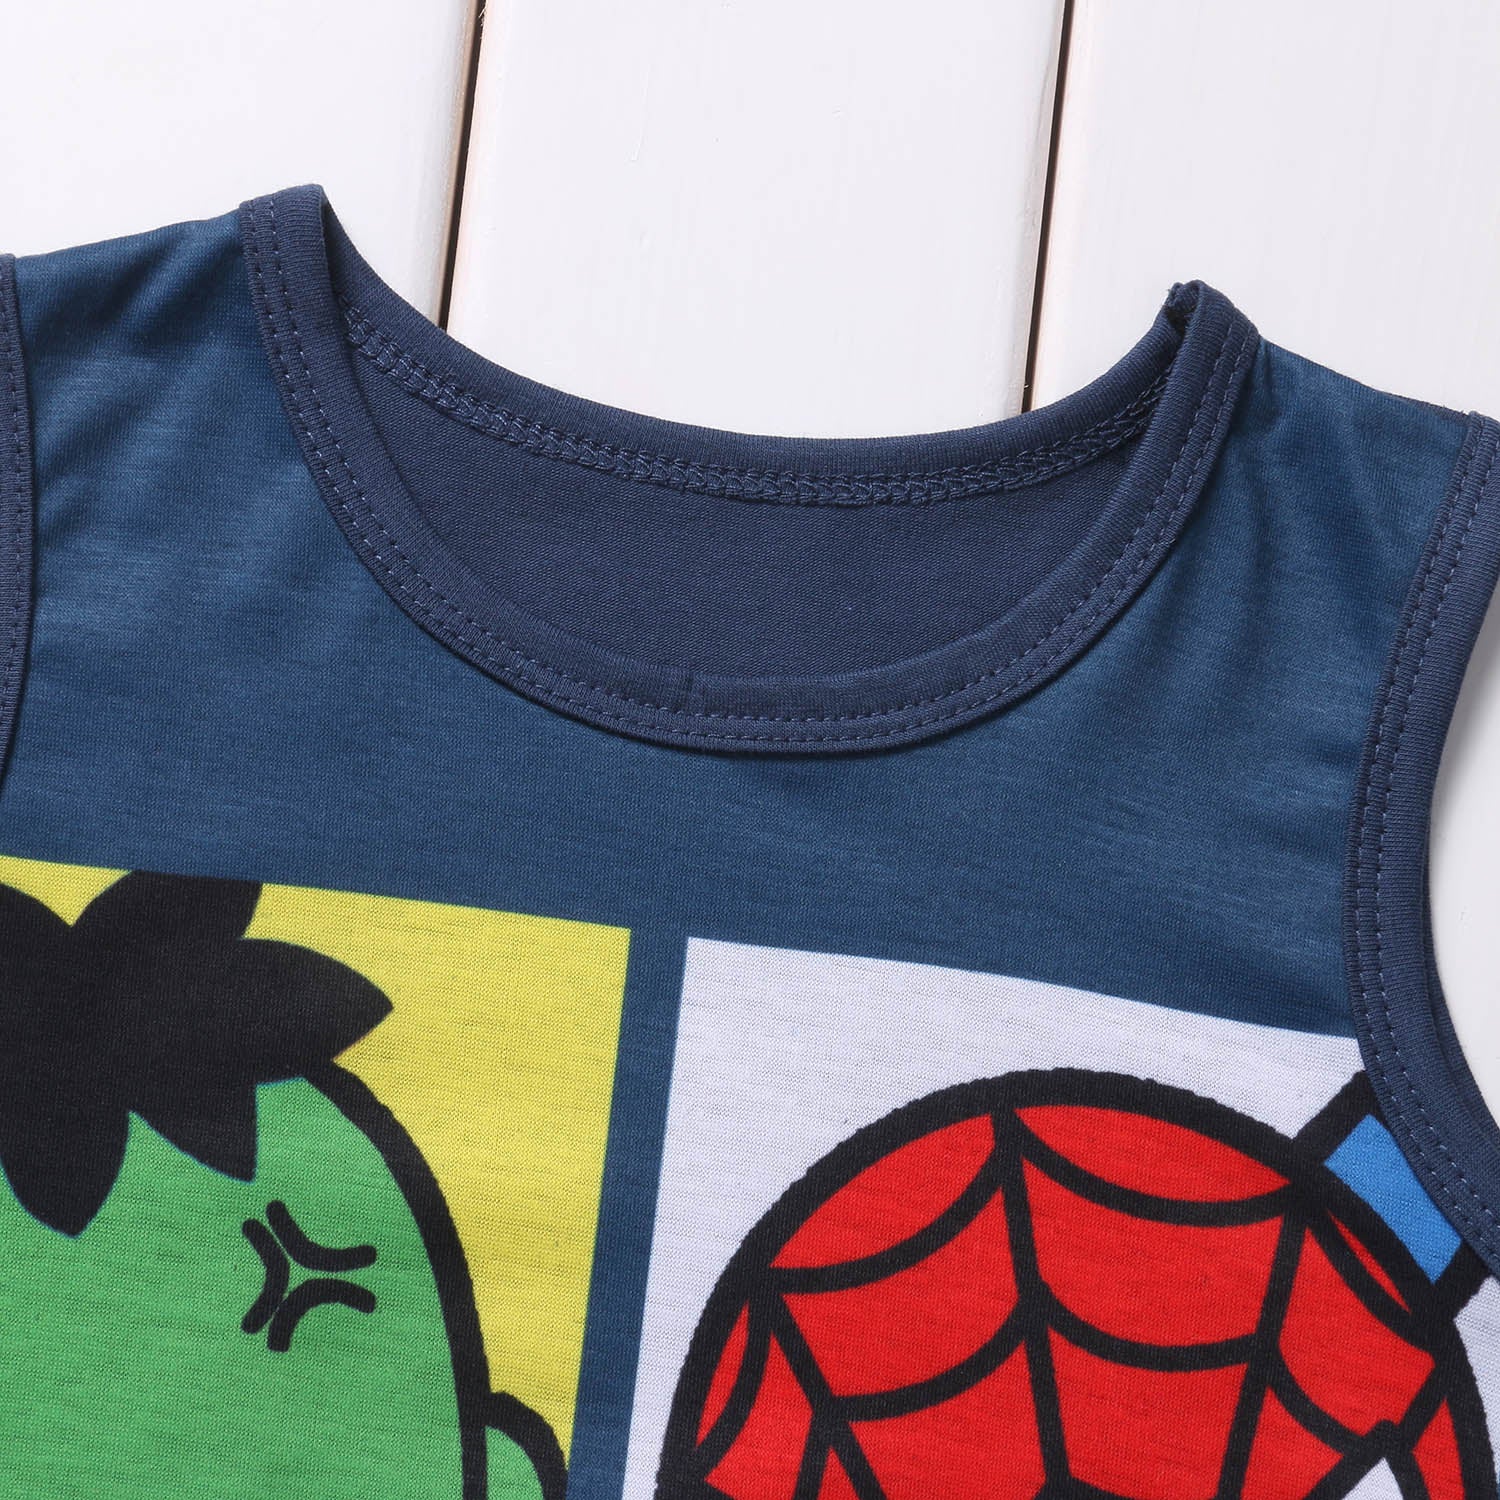 Cartoon Infant Baby Boy Girl Cotton Romper Jumpsuit Sleeveless O-neck Kids Clothes Outfit - ebowsos